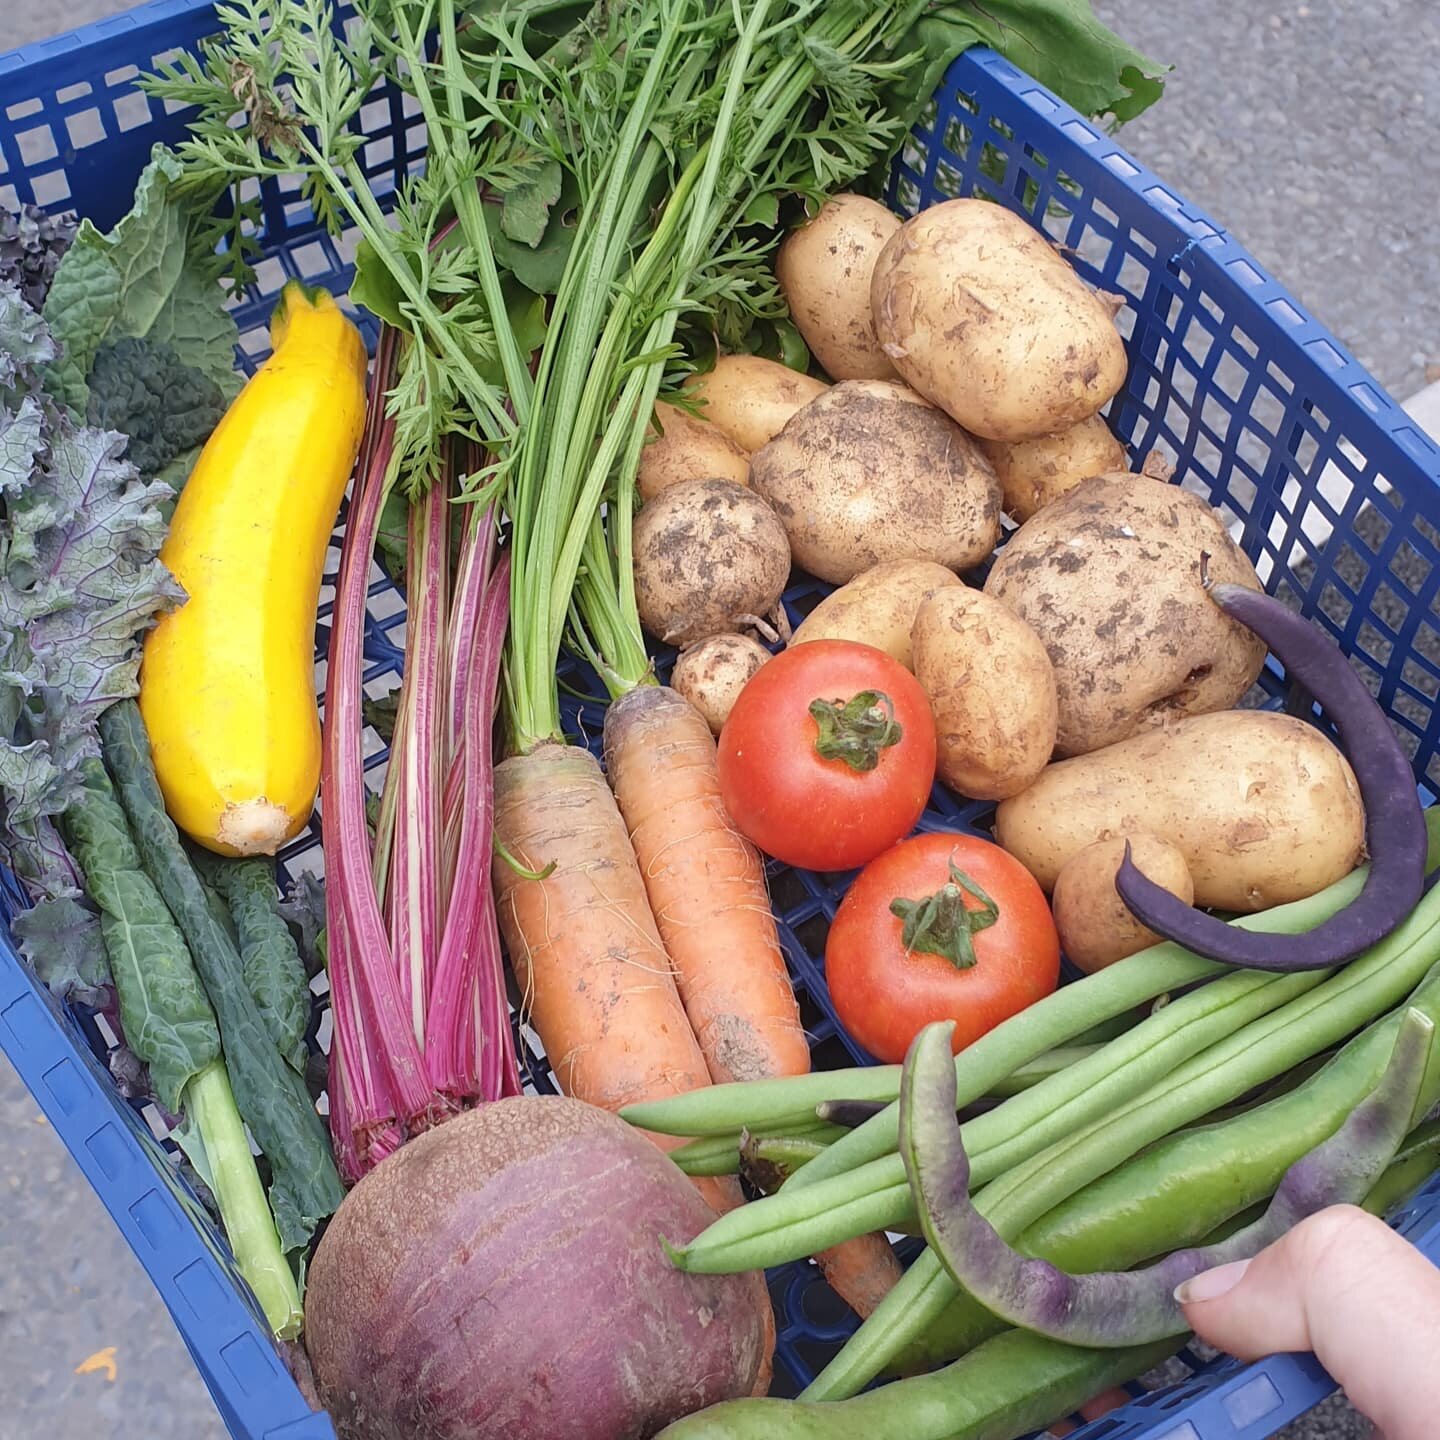 Would you like to help us help growers sell their gluts? 
We are offering &pound;5 &amp; &pound;10 fresh and local surplus boxes for collection on Saturdays, from the Community Sharing Hub in Aberystwyth.
Dm for more details, or email aberfoodcoop@ou